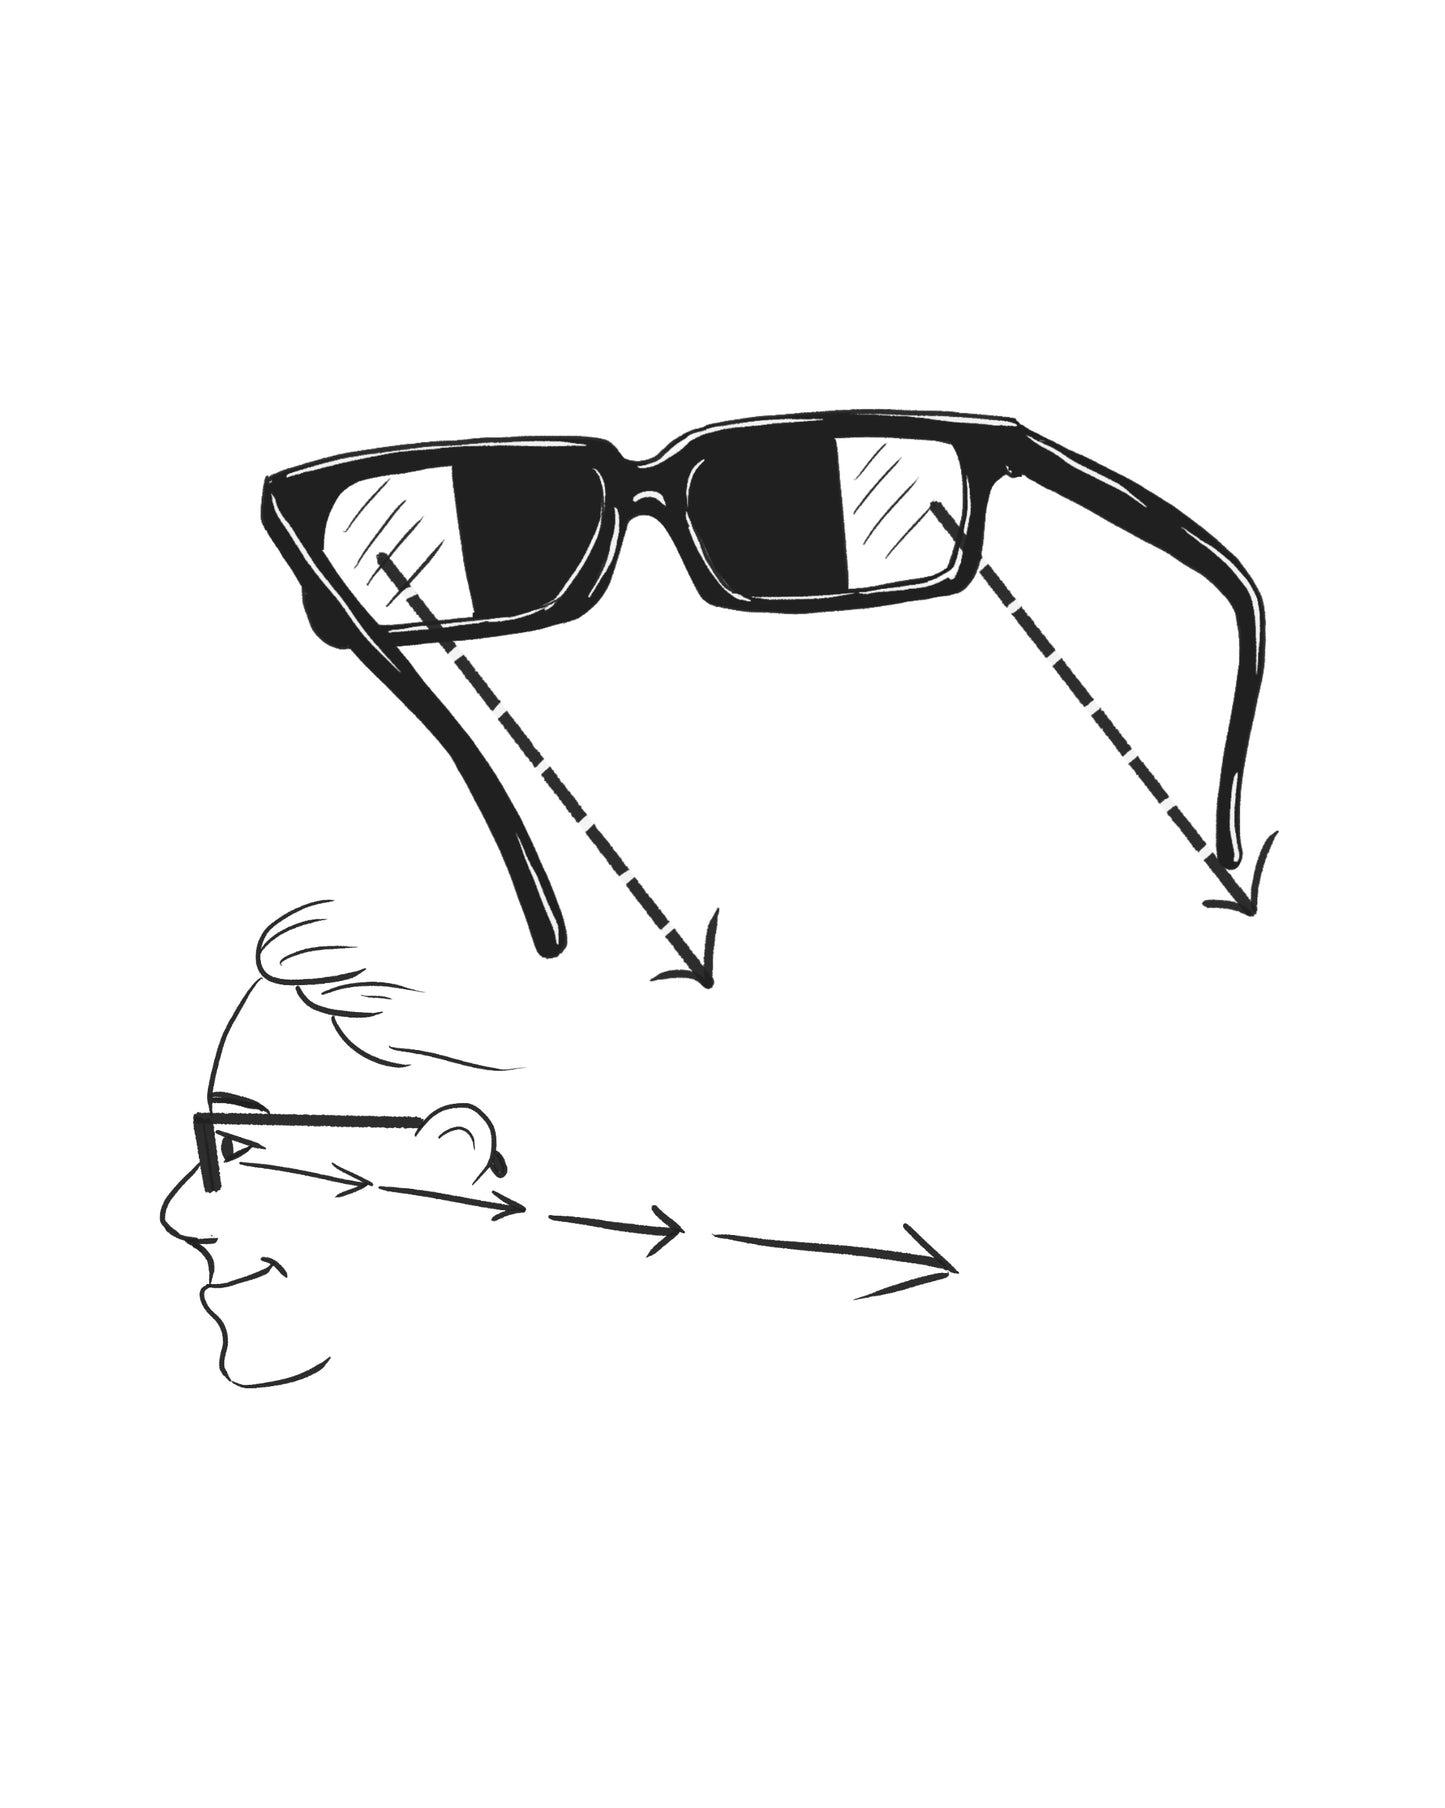 Spy Sunglasses. Like having eyes in the back of your head!